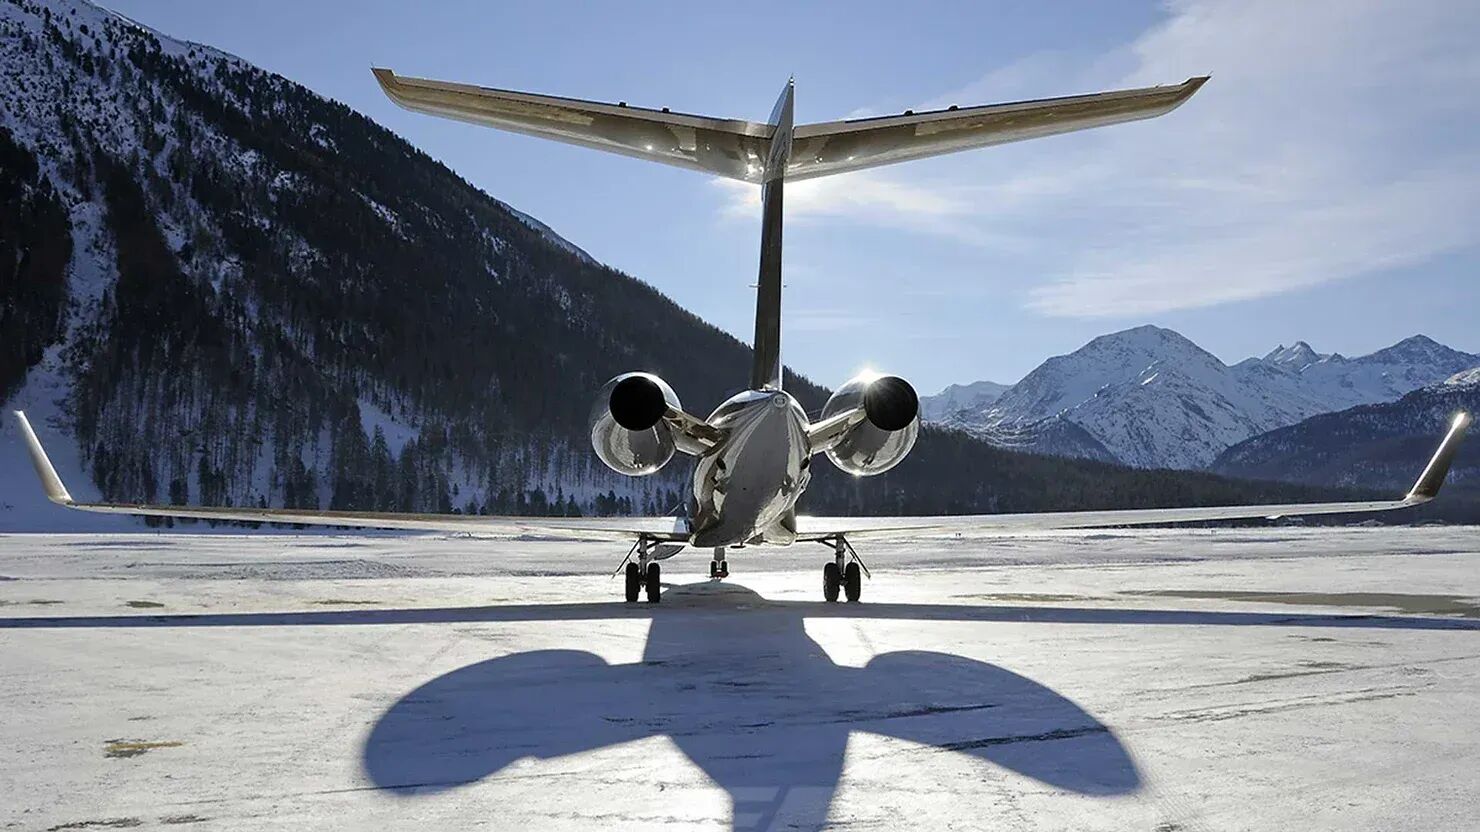 Private jet in front of snowy mountains